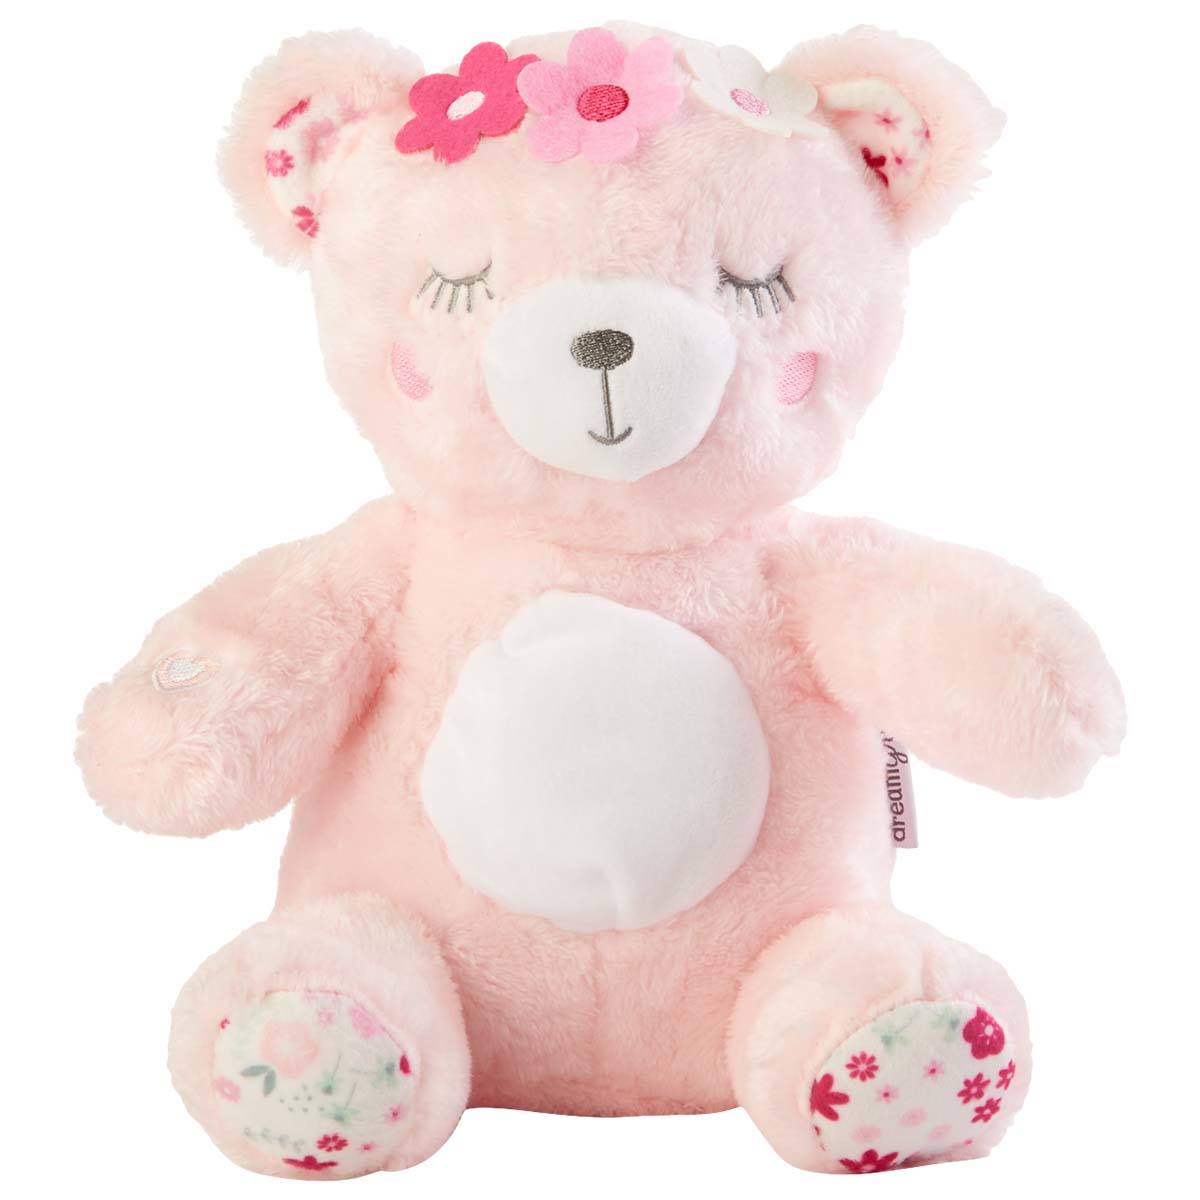 DreamGro(R) Bear Light & Lullaby Soother